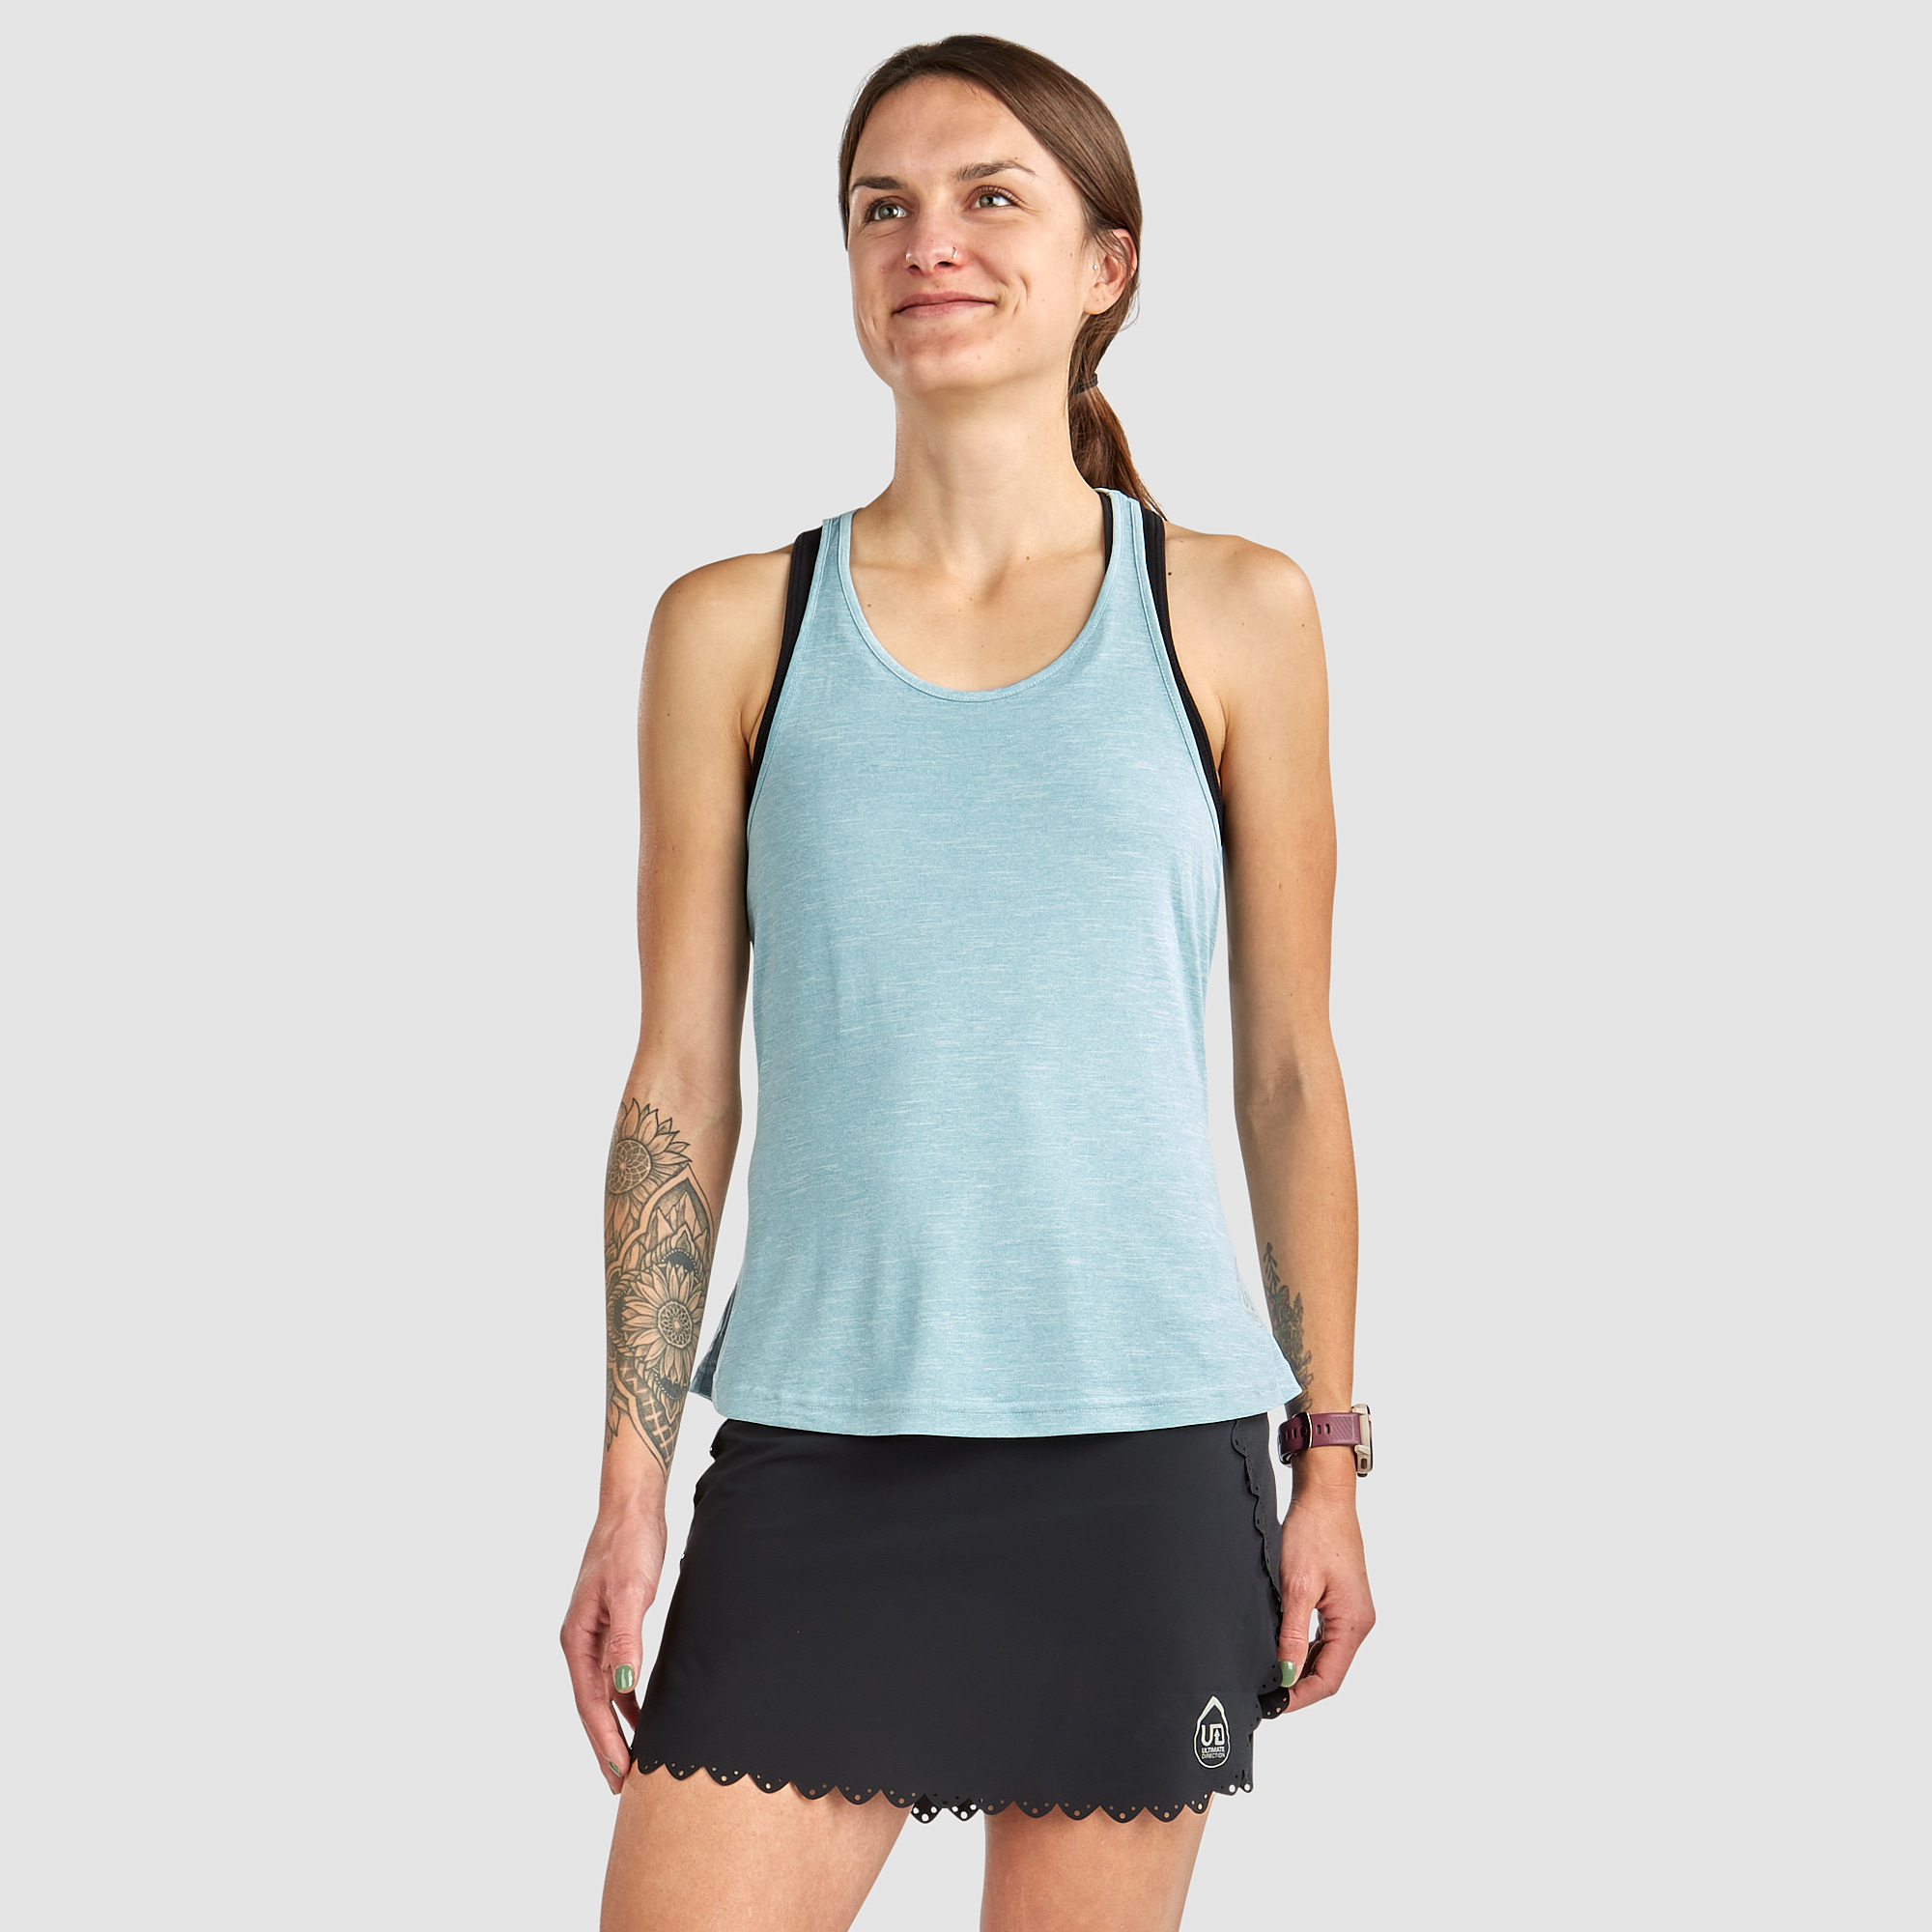 Ultimate Direction Women's Contralis Tank Top in Sea Blue Size Large